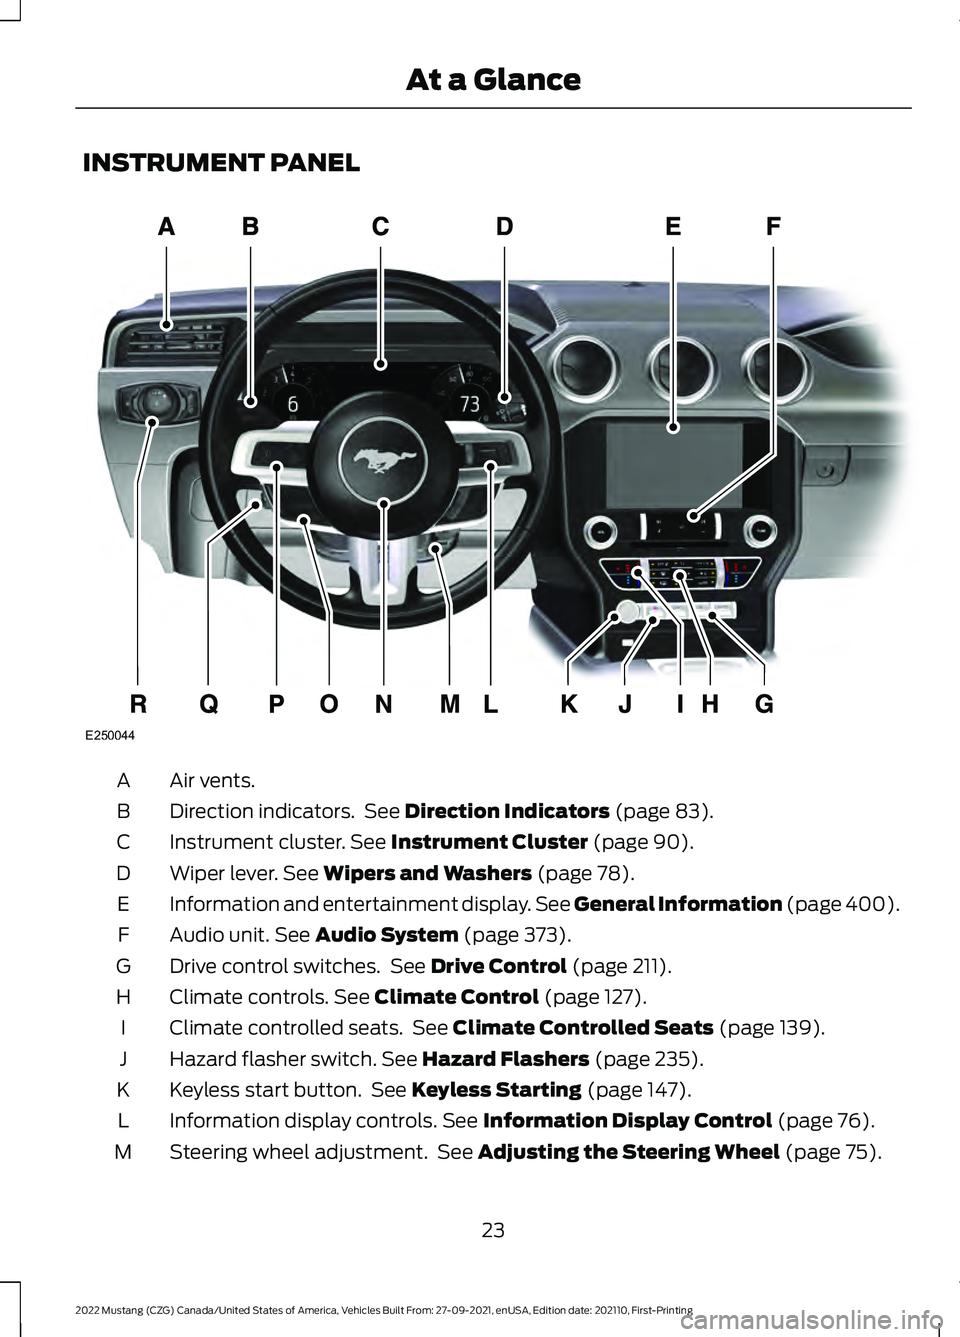 FORD MUSTANG 2022  Owners Manual INSTRUMENT PANEL
Air vents.
A
Direction indicators.  See Direction Indicators (page 83).
B
Instrument cluster.
 See Instrument Cluster (page 90).
C
Wiper lever.
 See Wipers and Washers (page 78).
D
In